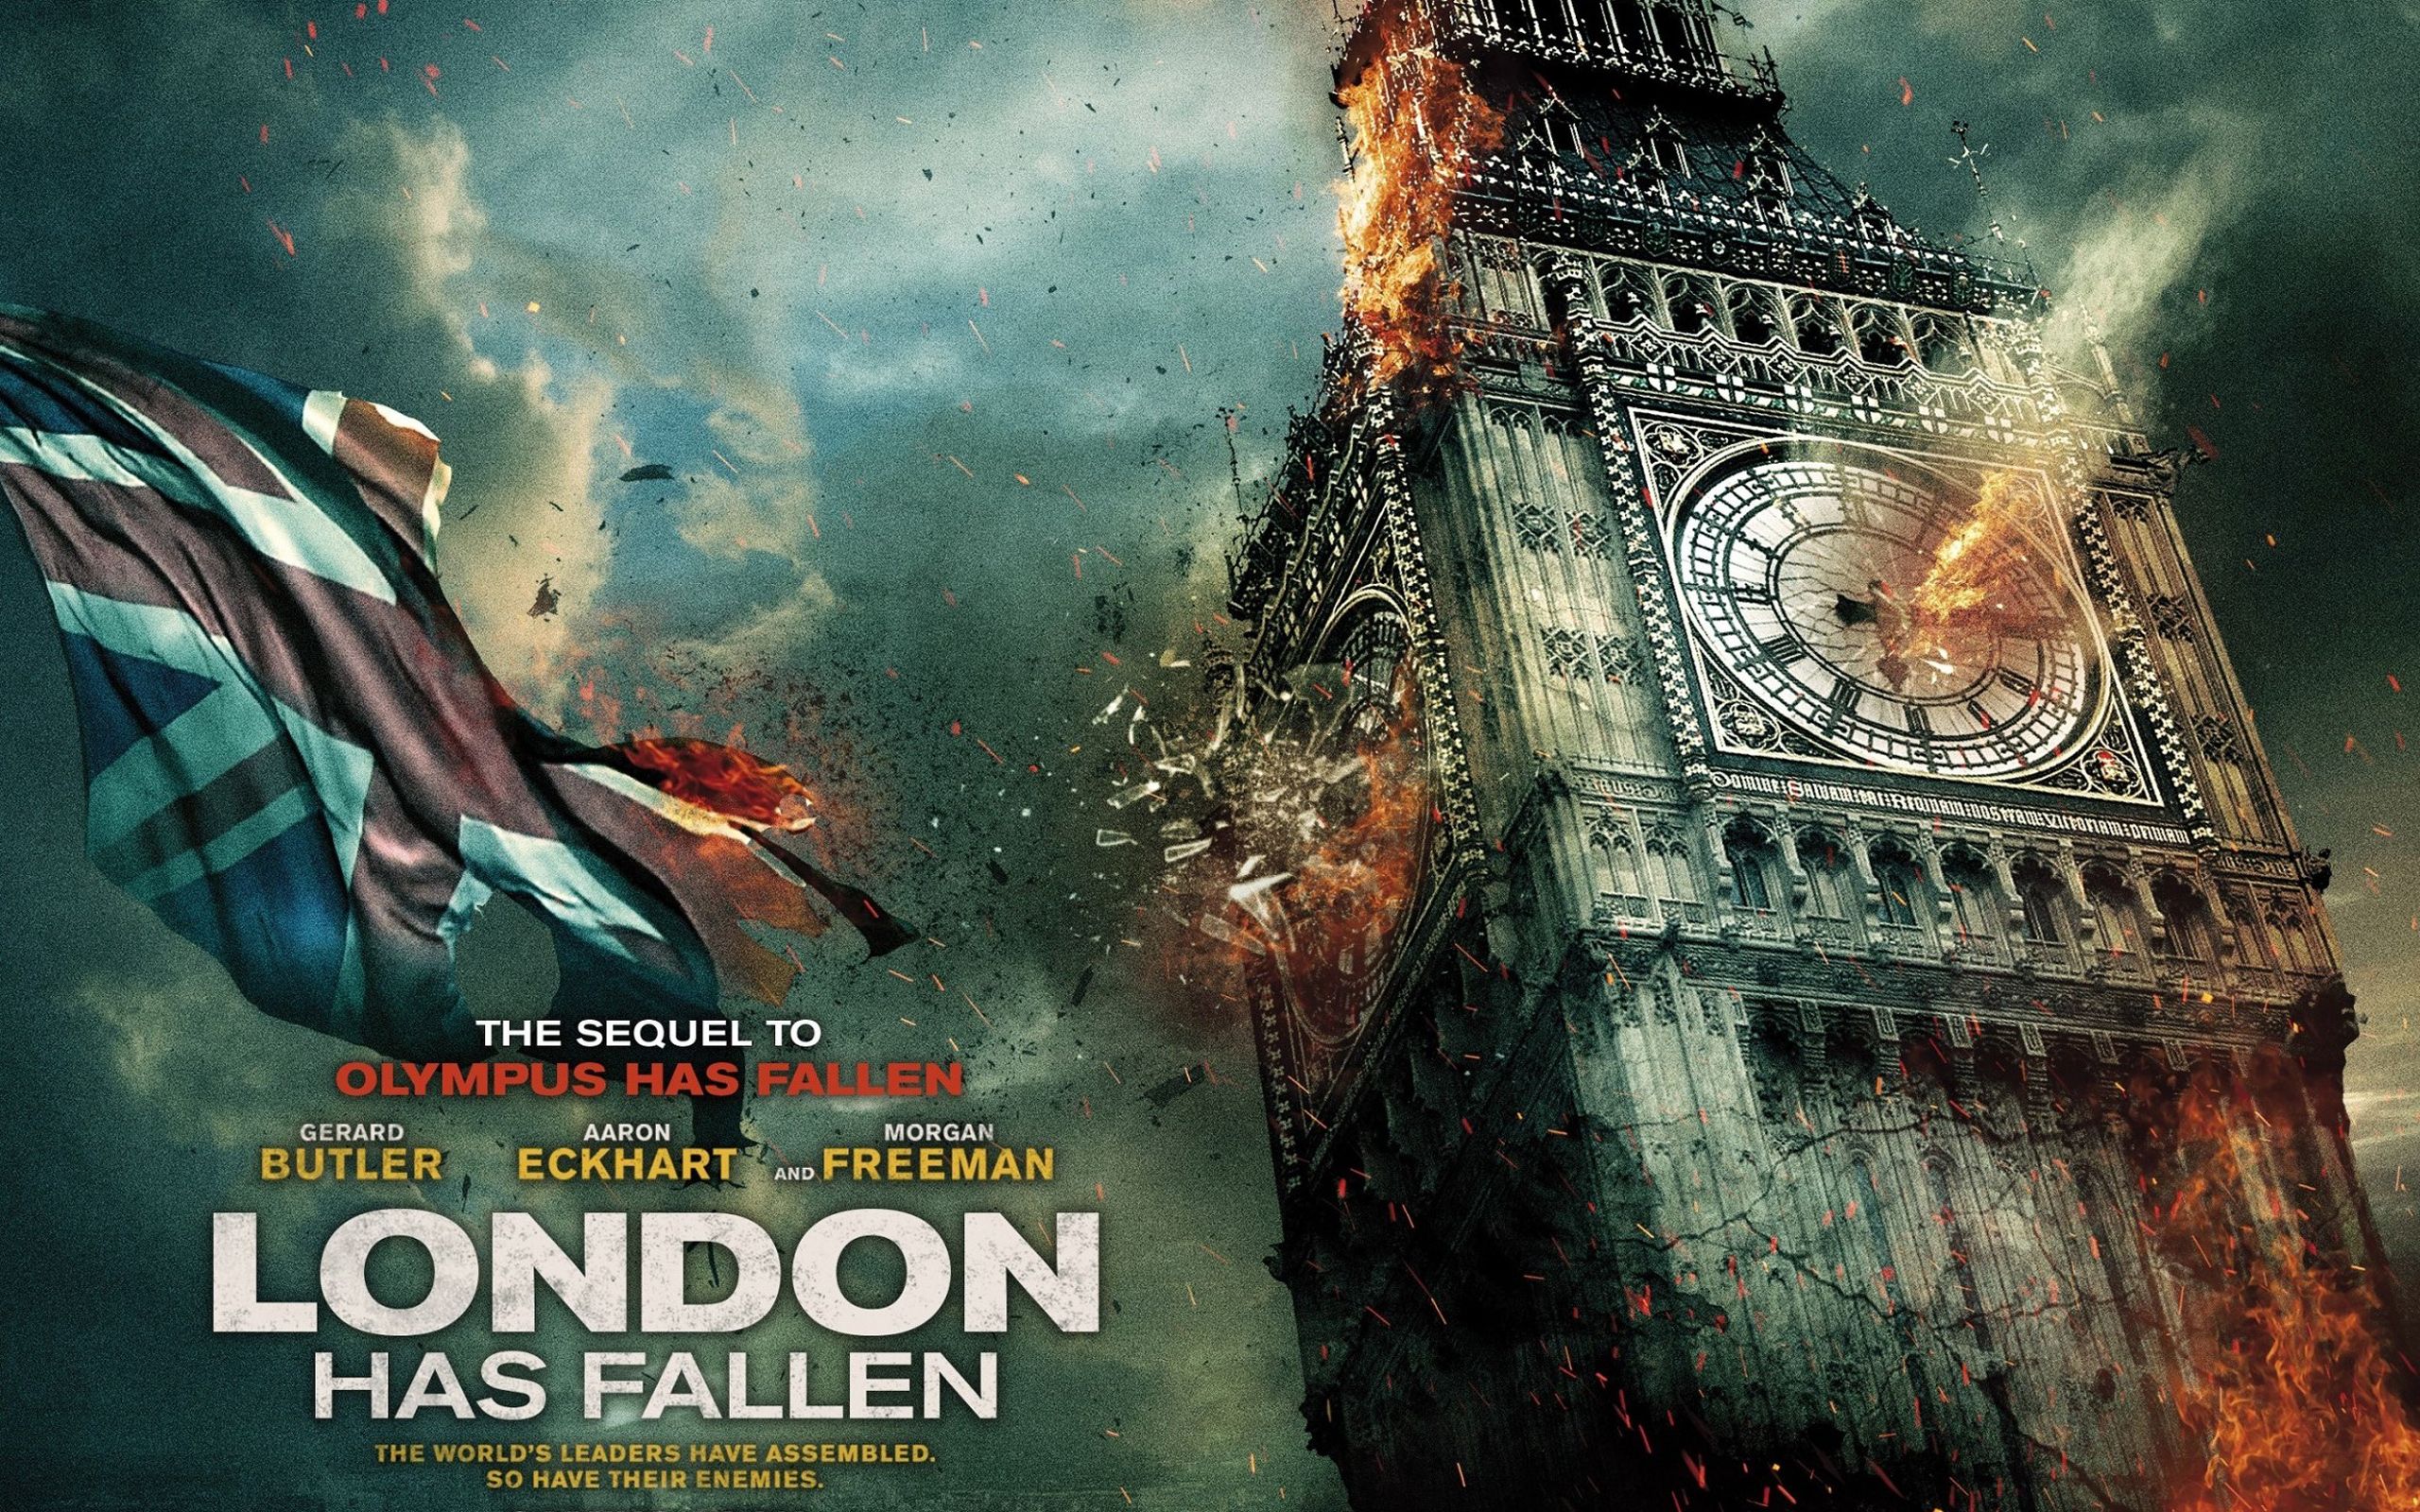 London Has Fallen Movie 2560x1600 Resolution HD 4k Wallpaper, Image, Background, Photo and Picture